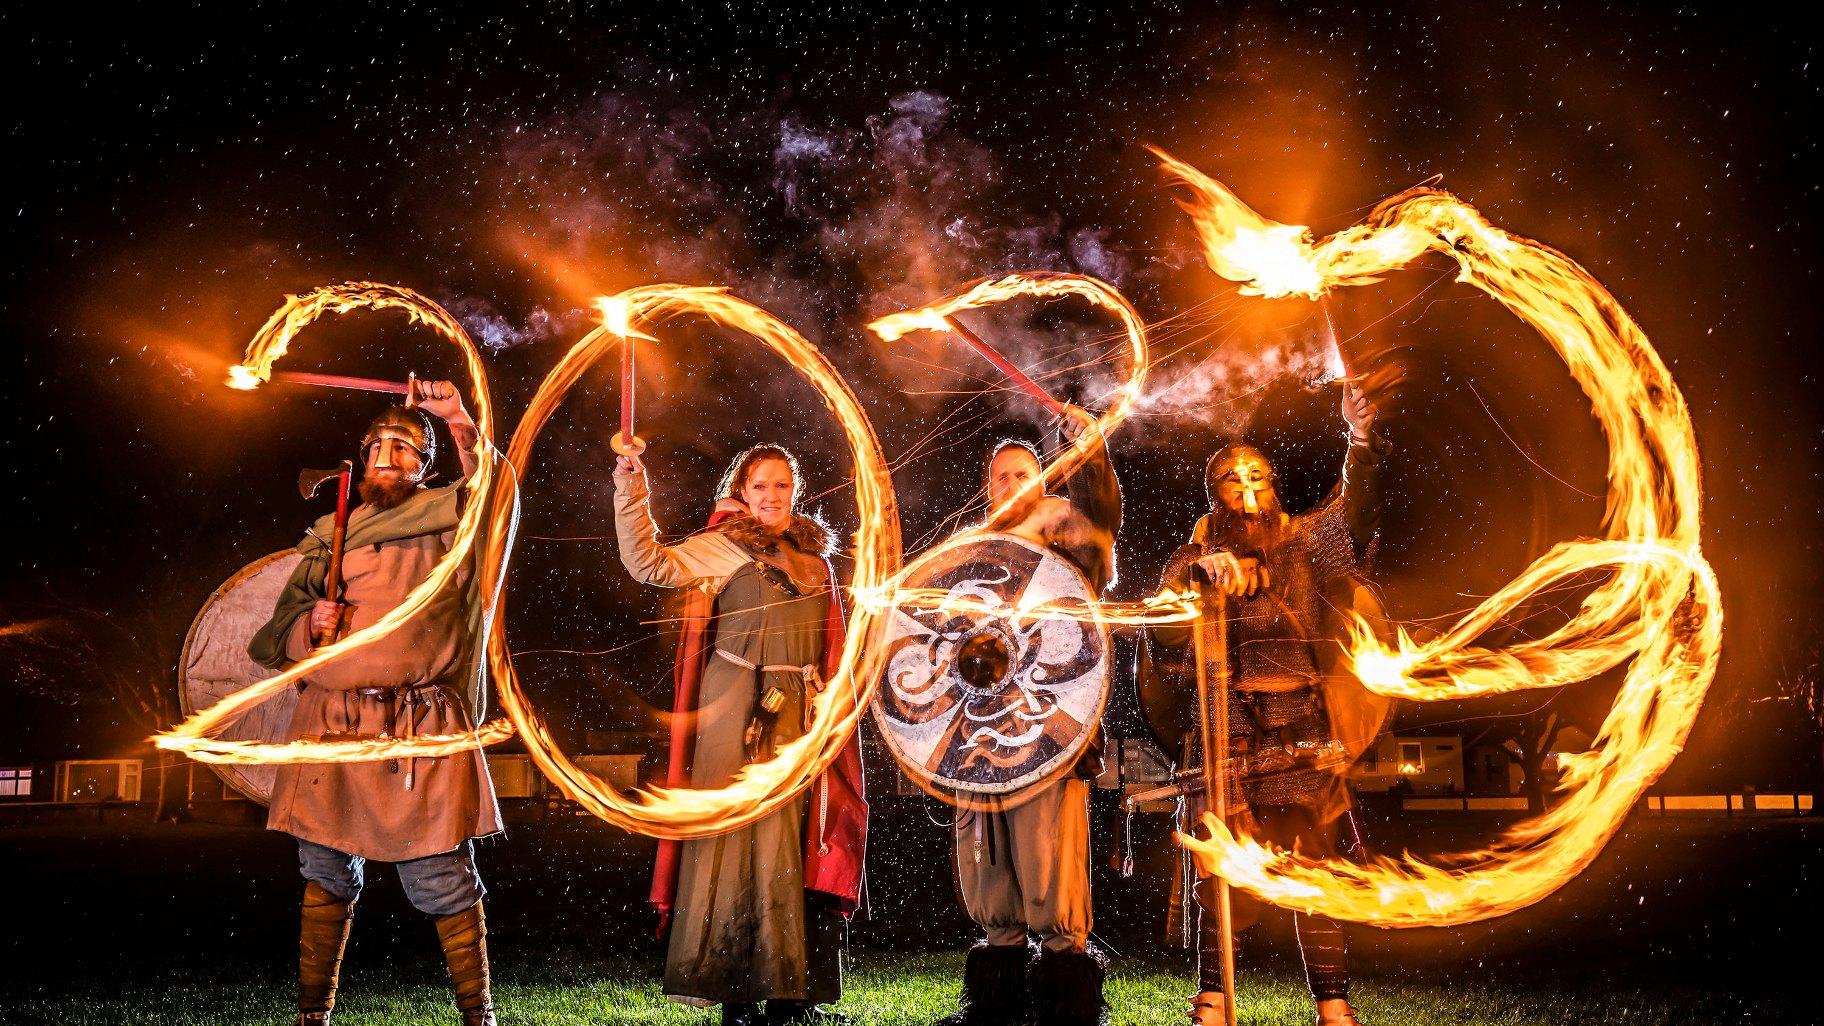 Viking reenactors use flaming torches to write 2023 at the Flamborough Fire Festival, a Viking themed parade in aid of charities and local community groups, held on New Year's Eve in Flamborough near Bridlington, England, Saturday Dec. 31, 2022. (Danny Lawson/PA via AP)